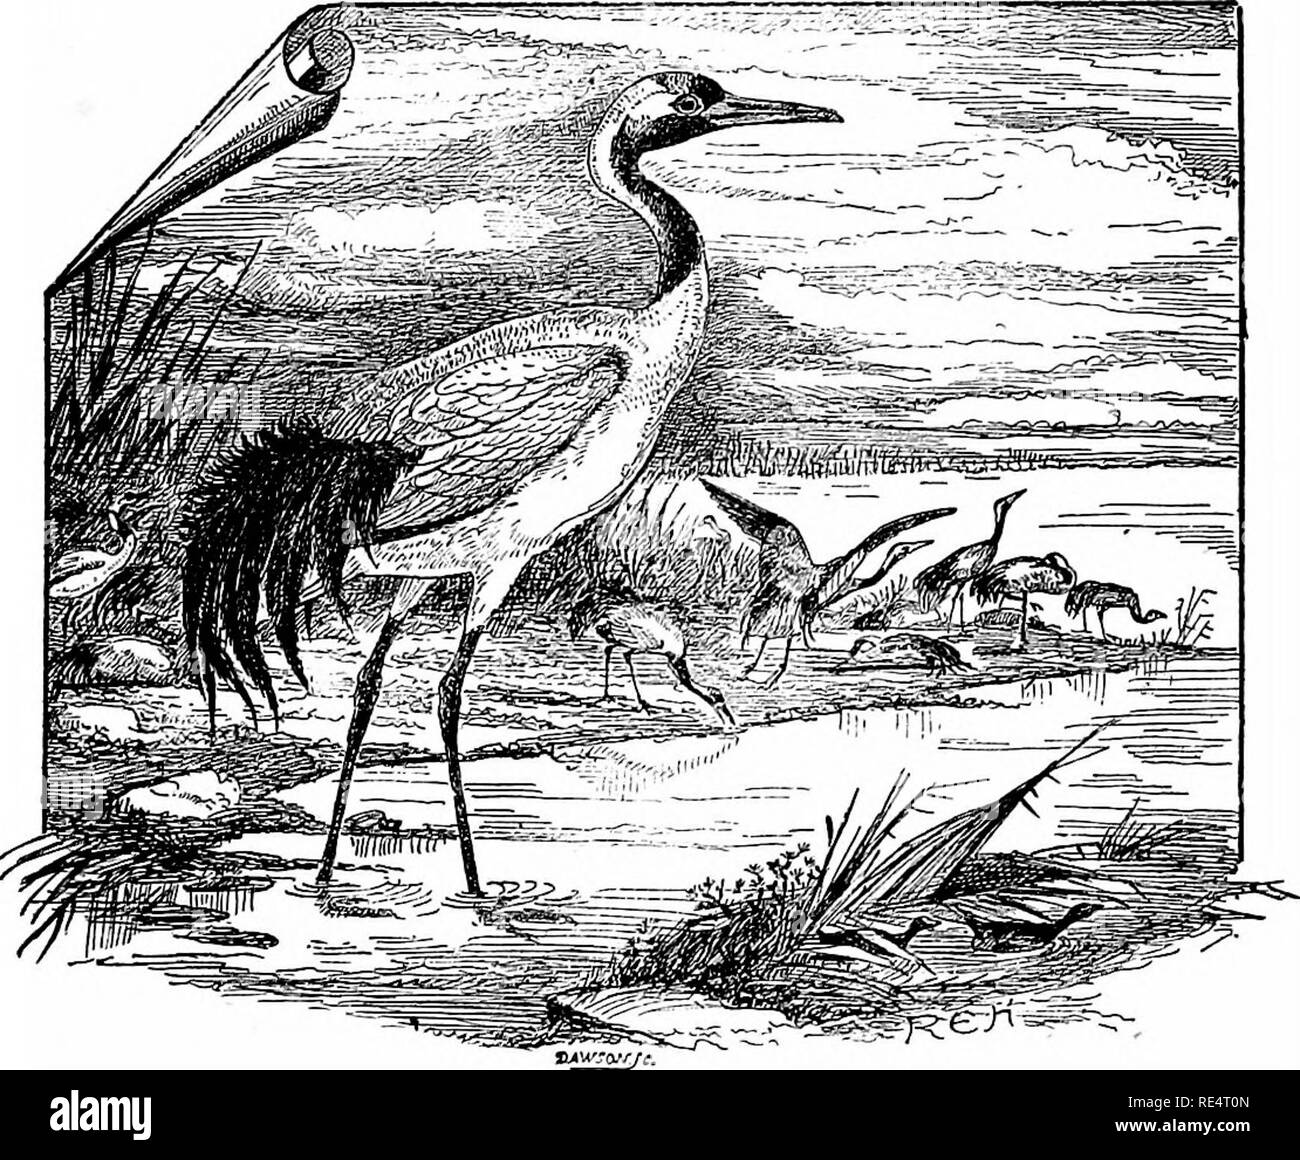 . The birds of the Japanese Empire. Birds. GRALL.E. 351 355. GRUS JAPONENSIS. (SACRED CRANE.) Ardea (Grus) japonemis, Miiller, Natursyst Suppl. p. 110 (1776). The Sacred Crane has a white body like the Siberian White Crane, but the forehead, lores, chin, fore neck, lower hind neck, and disintegrated tertials are black. No other Japanese Crane has a white body and a black fore neck. Figures: Wolf, Zool. Sketches, series i. pi. 46; Tegetmeier, Nat. Hist. Cranes, pp. 13, 53.. Ch-us japonensis. The Sacred Crane, so called because it was formerly held sacred in Japan, and was only allowed to be haw Stock Photo